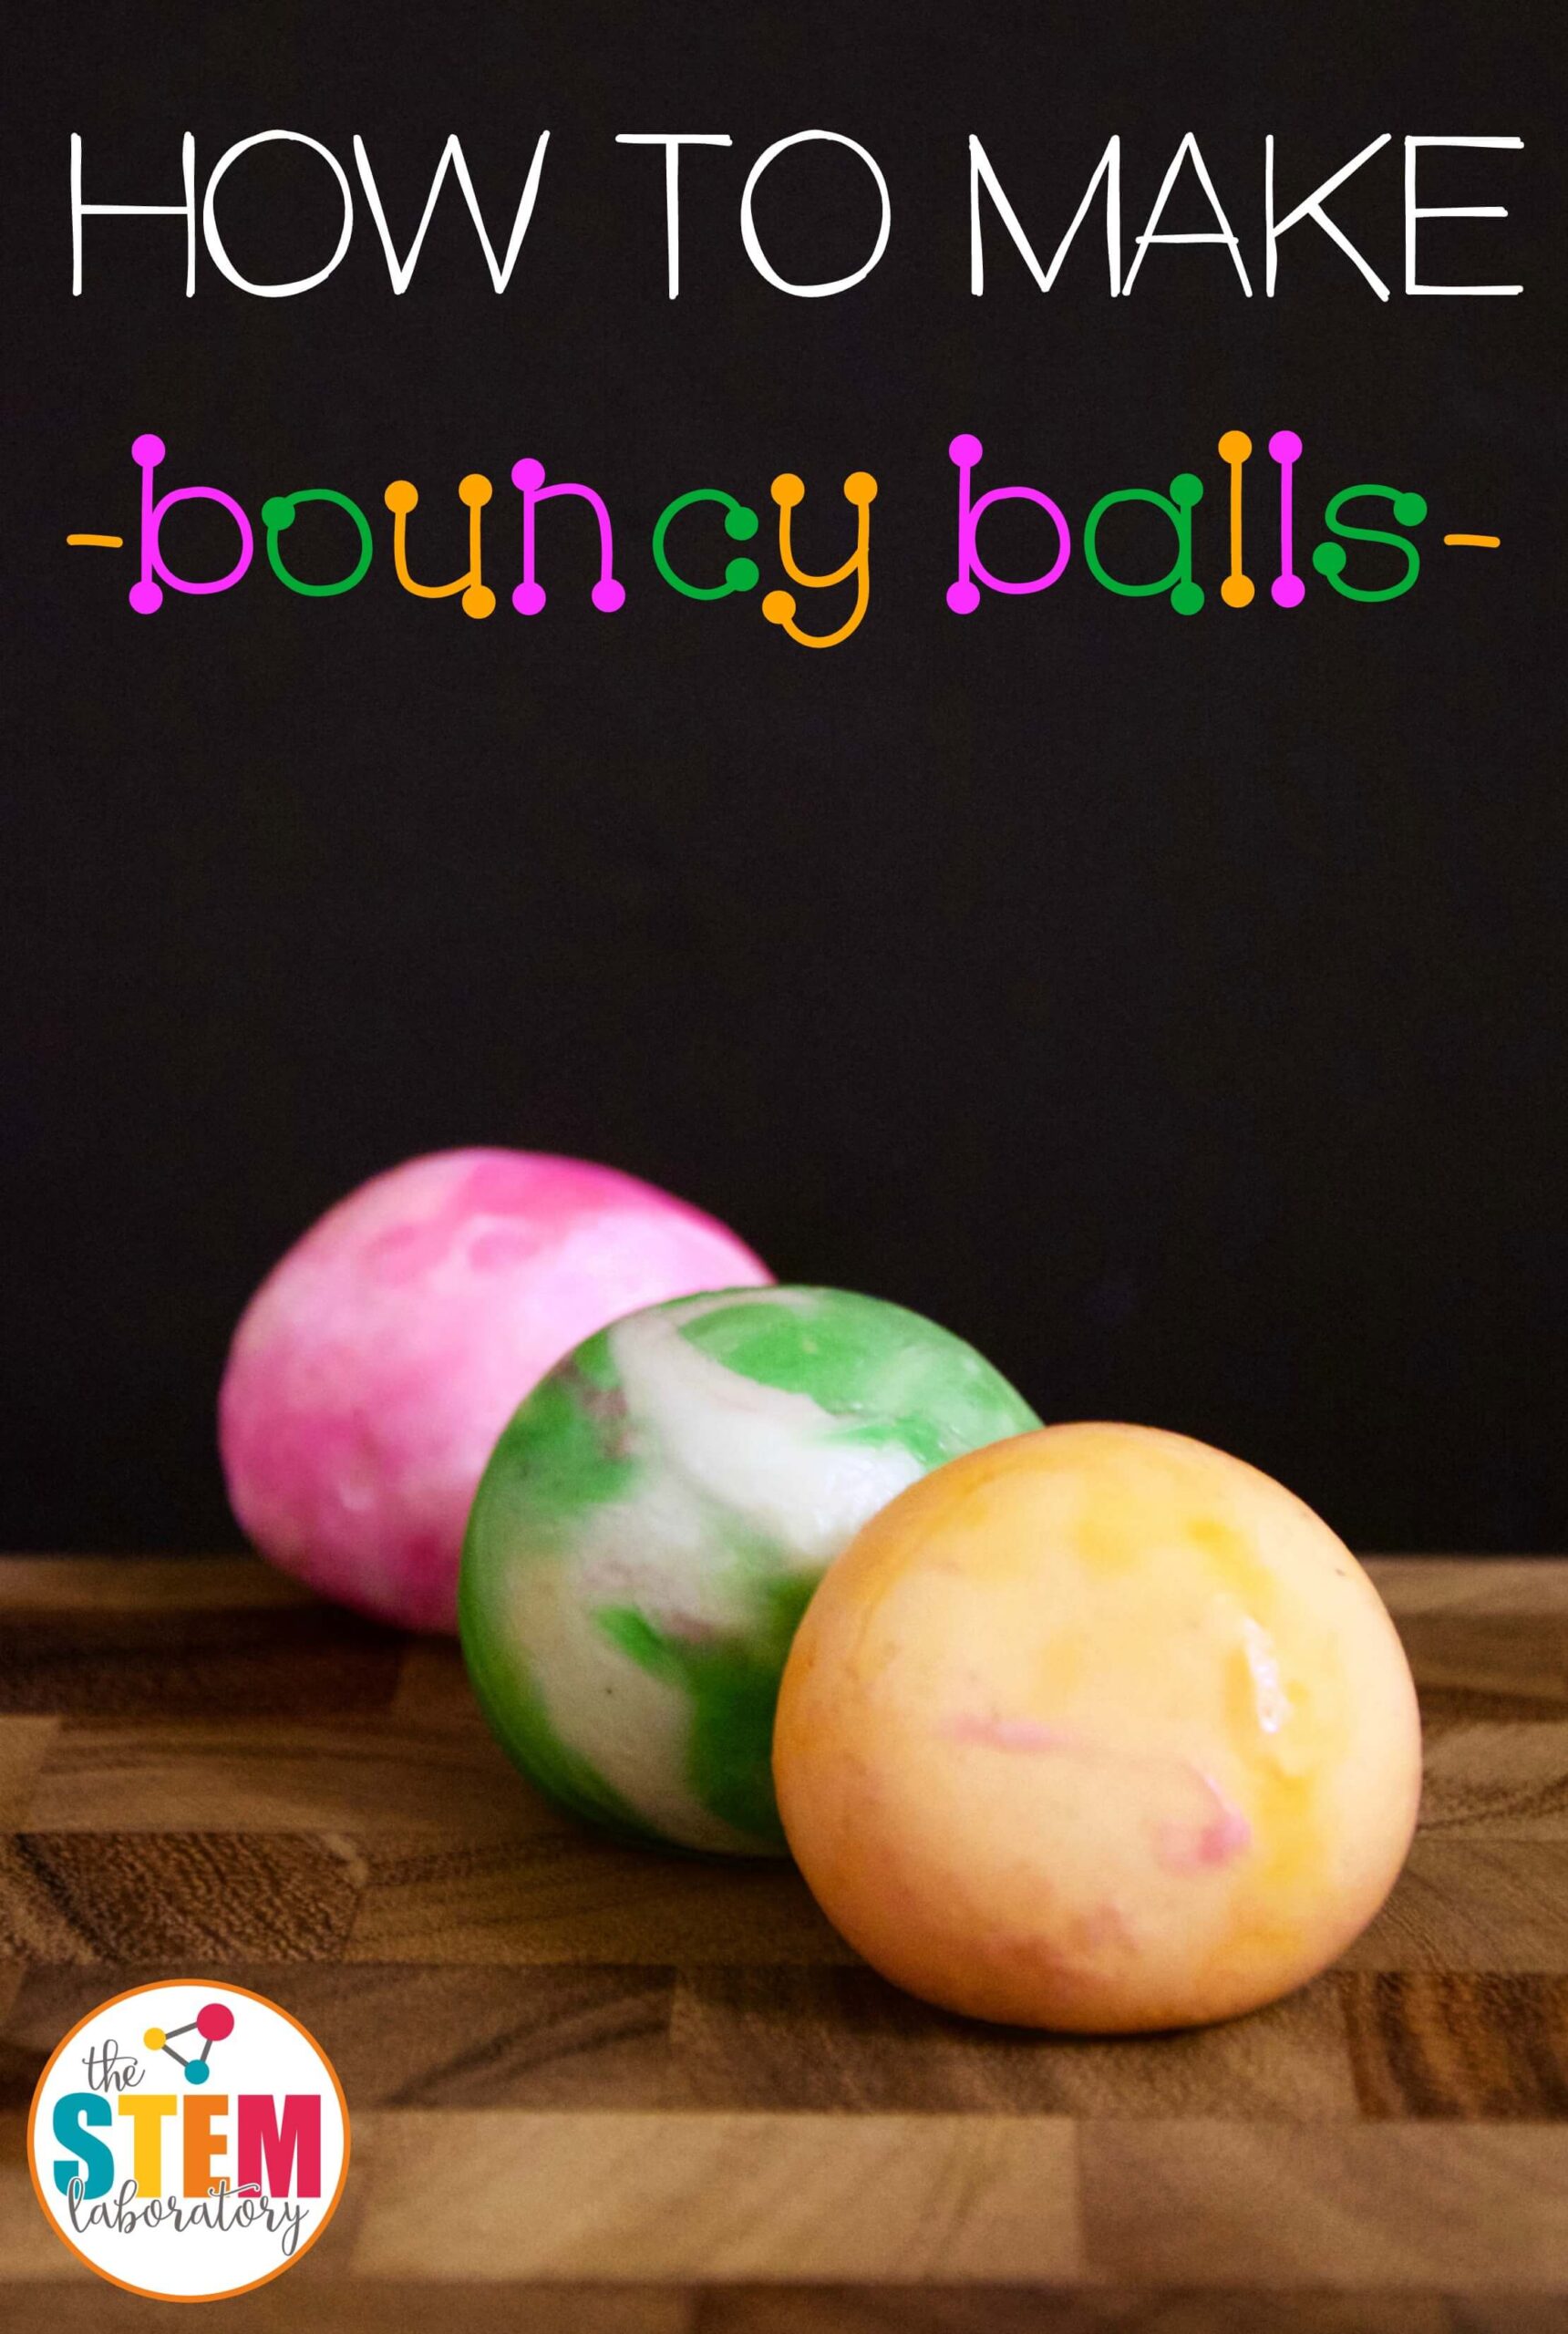 How to Make Bouncy Balls